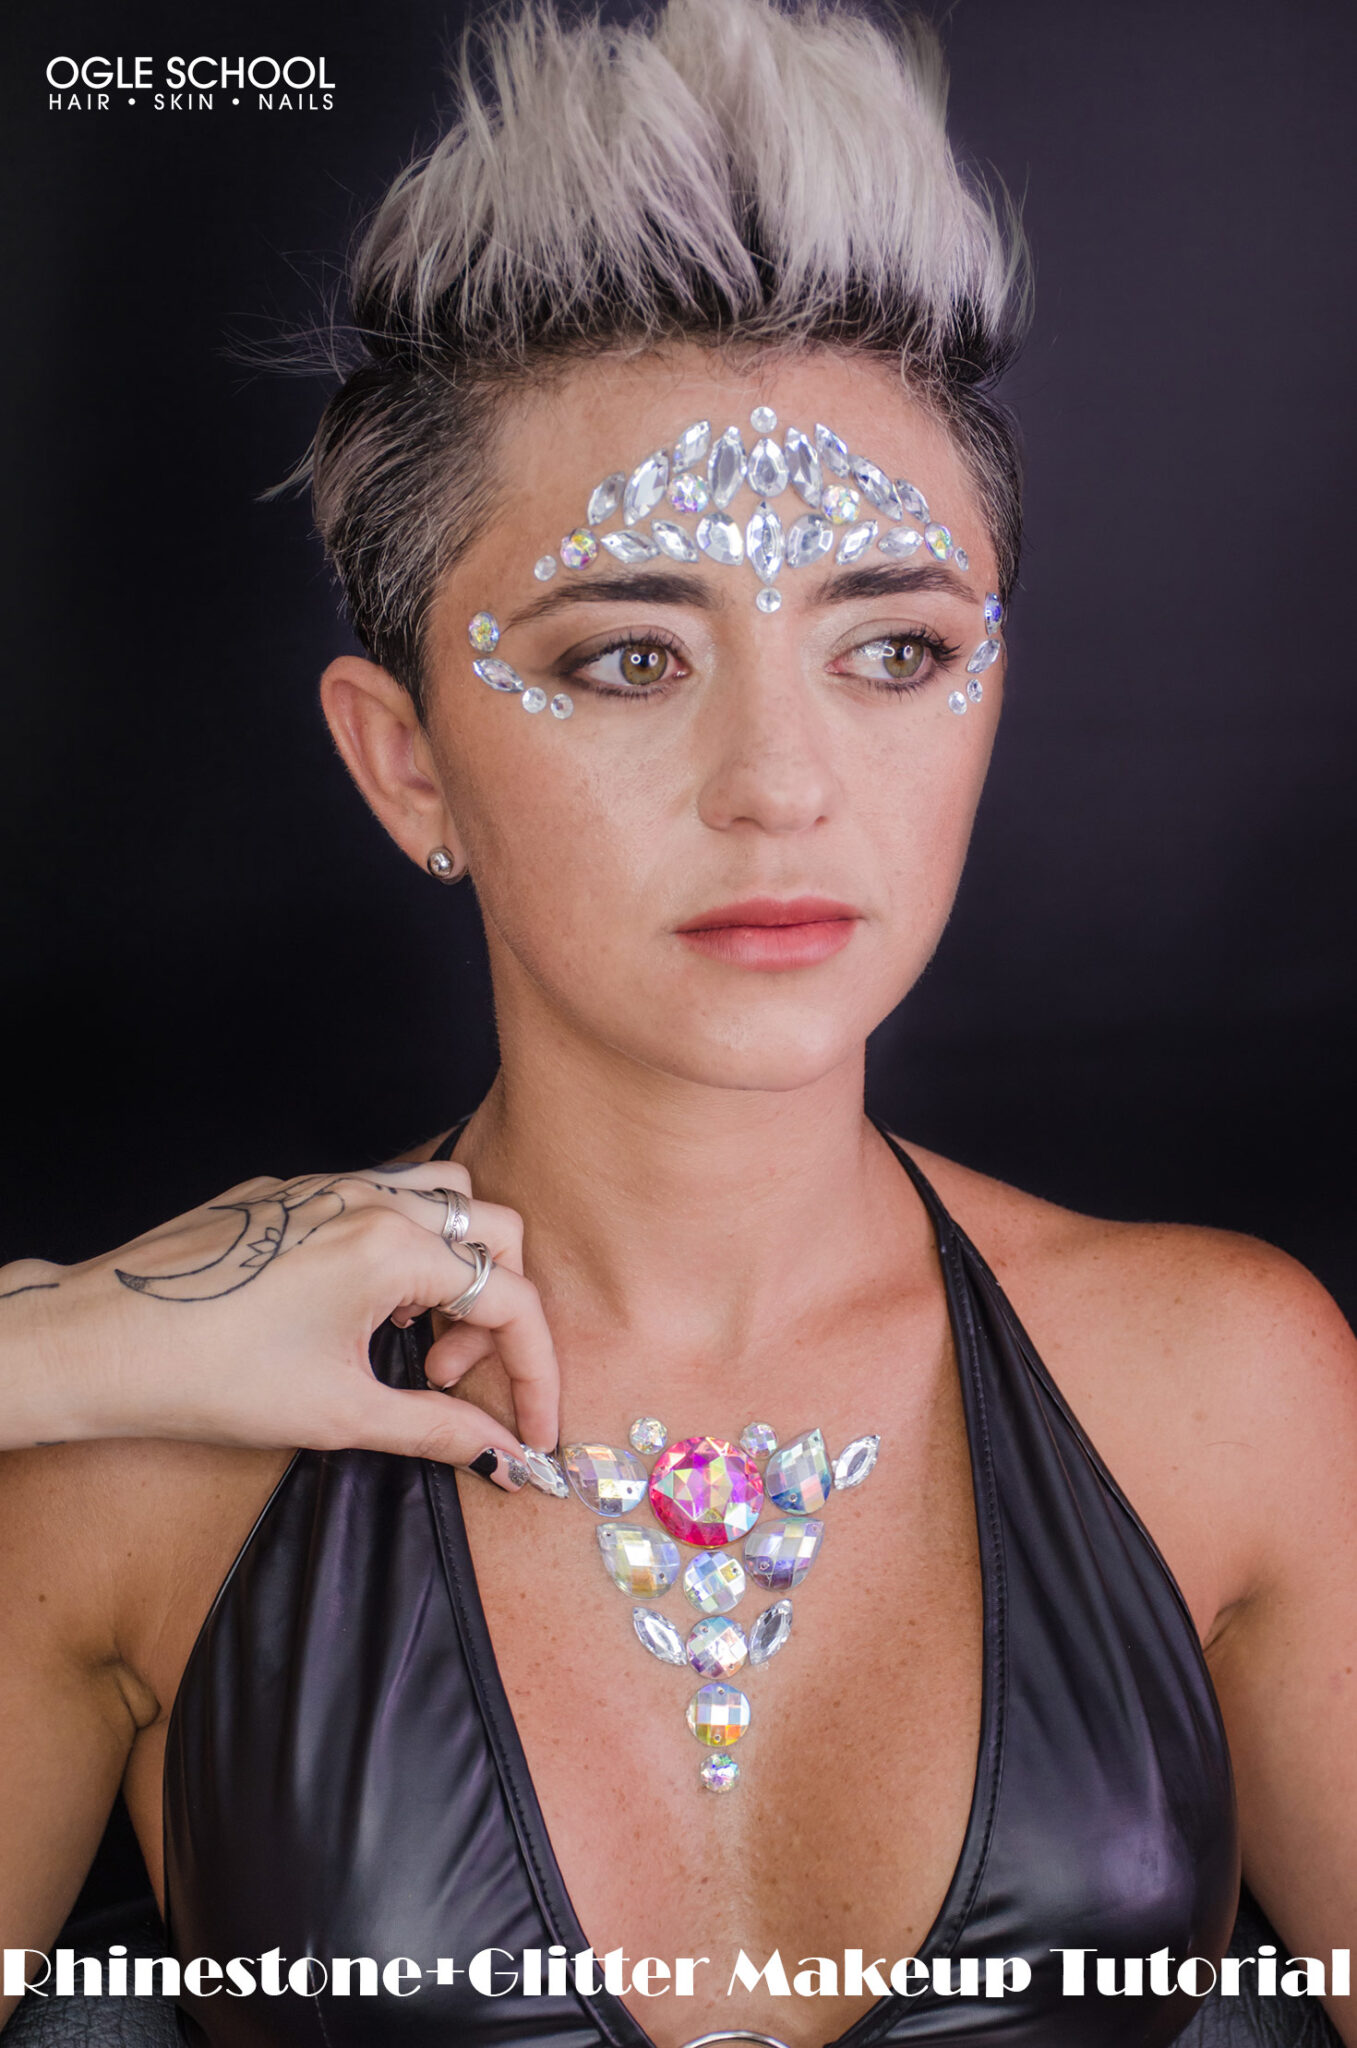 How to Create a Rhinestone Makeup Look for Any Skill Level